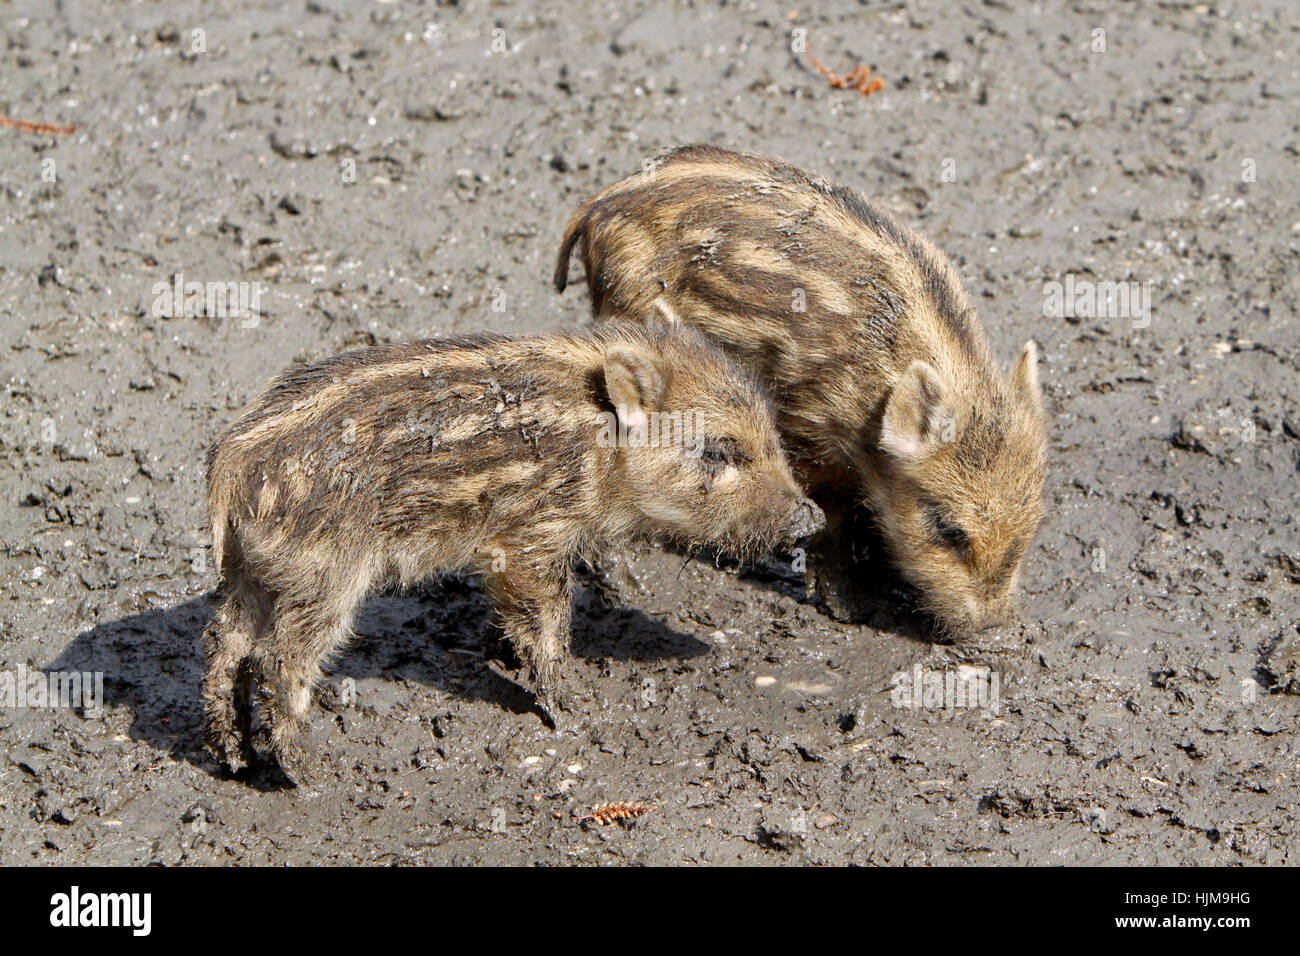 wild boar, pig, young animal, young of a wild boar, animal child, wild boars, Stock Photo